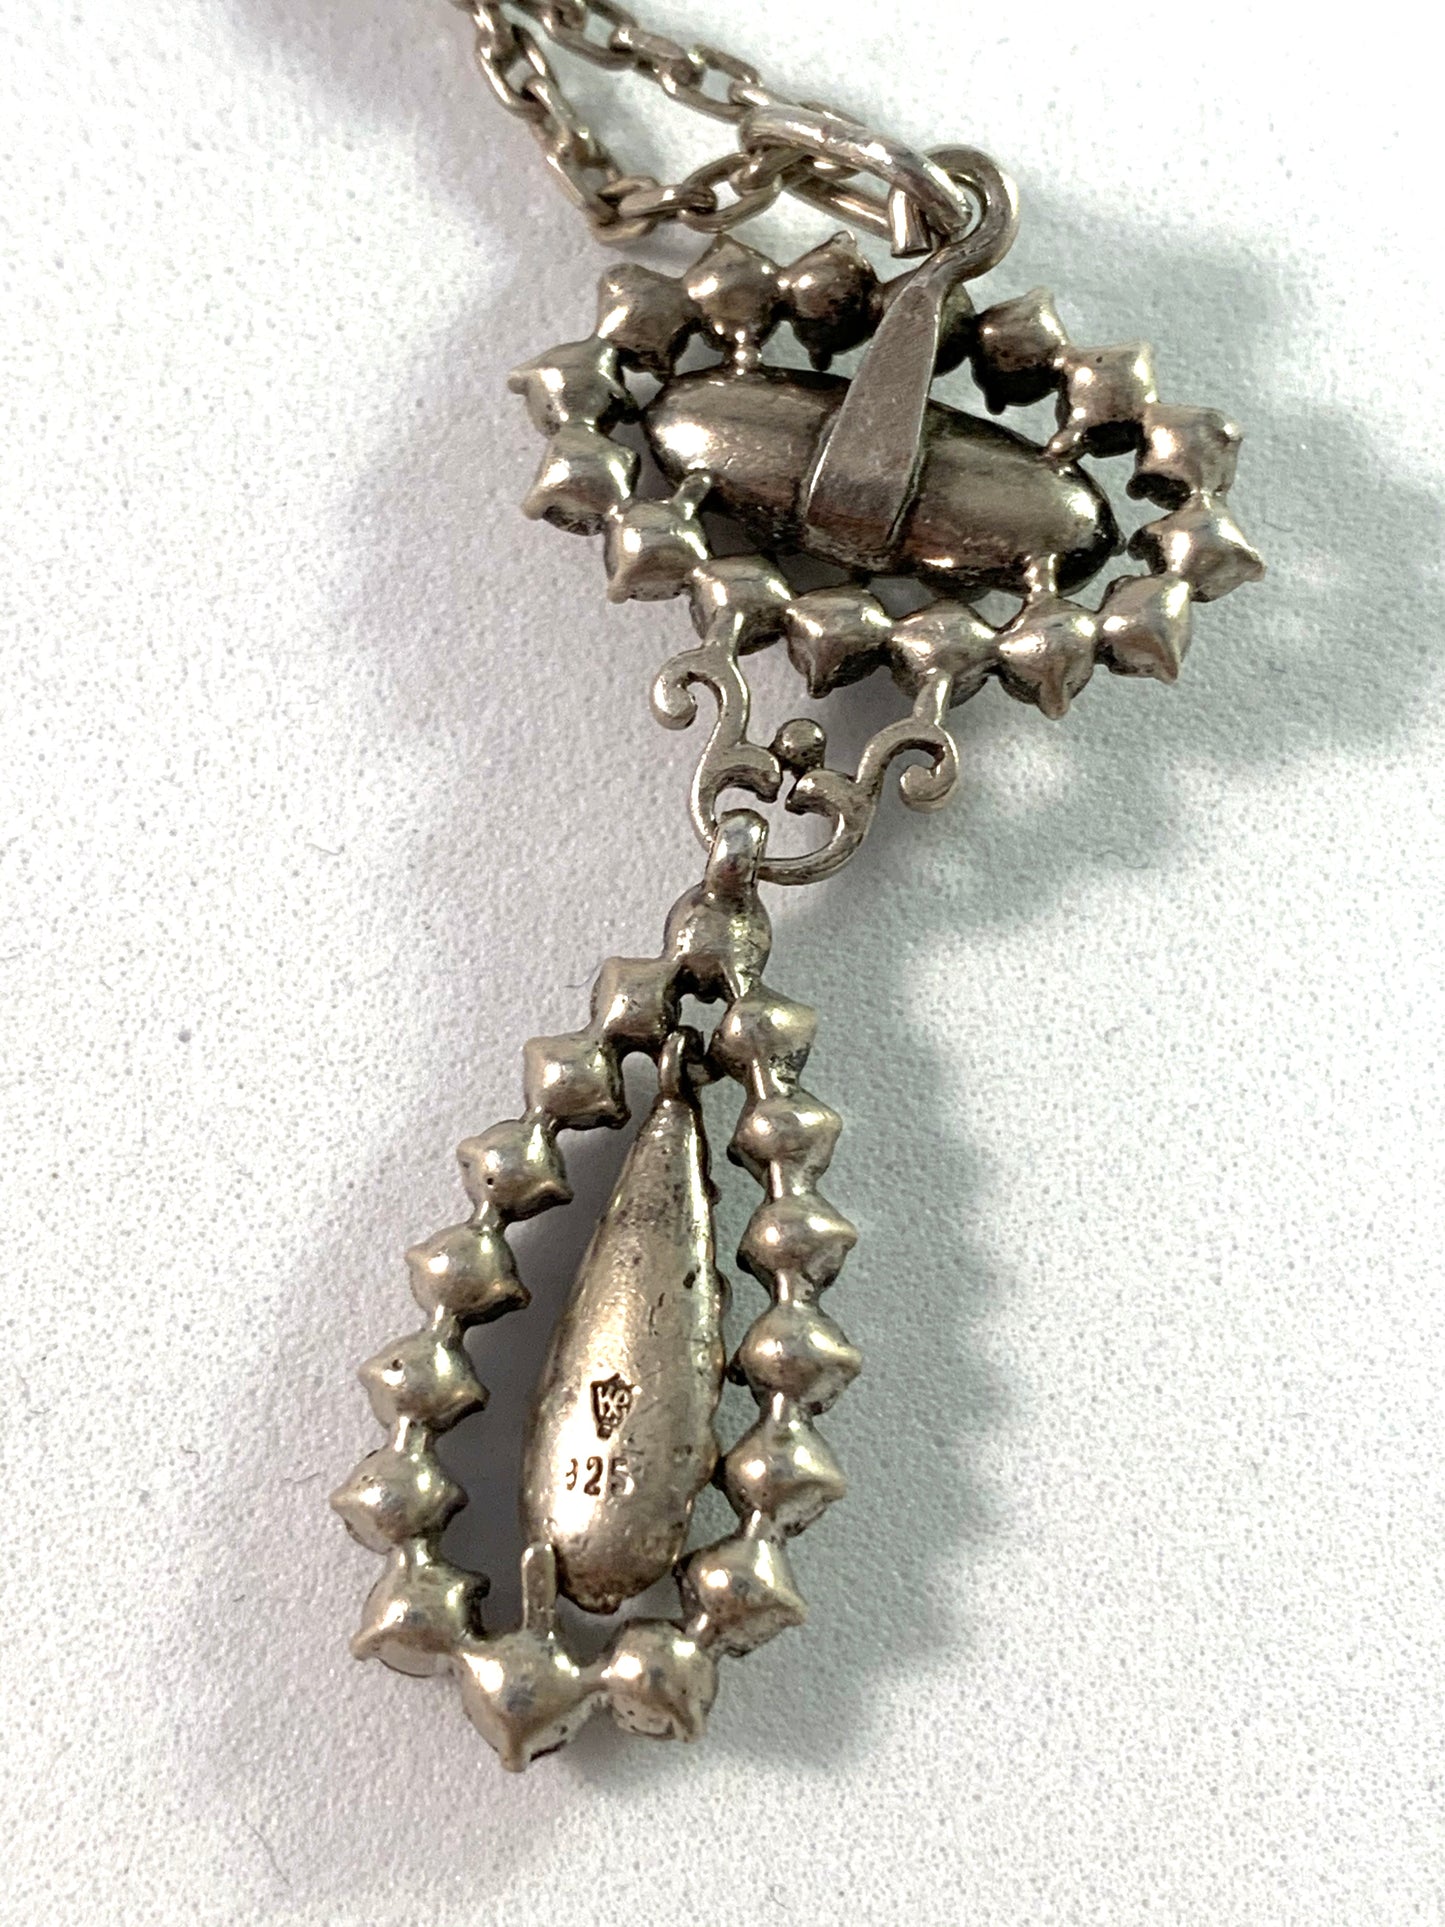 Knoll & Pregizer, Germany 1920s Solid Silver Paste Necklace.